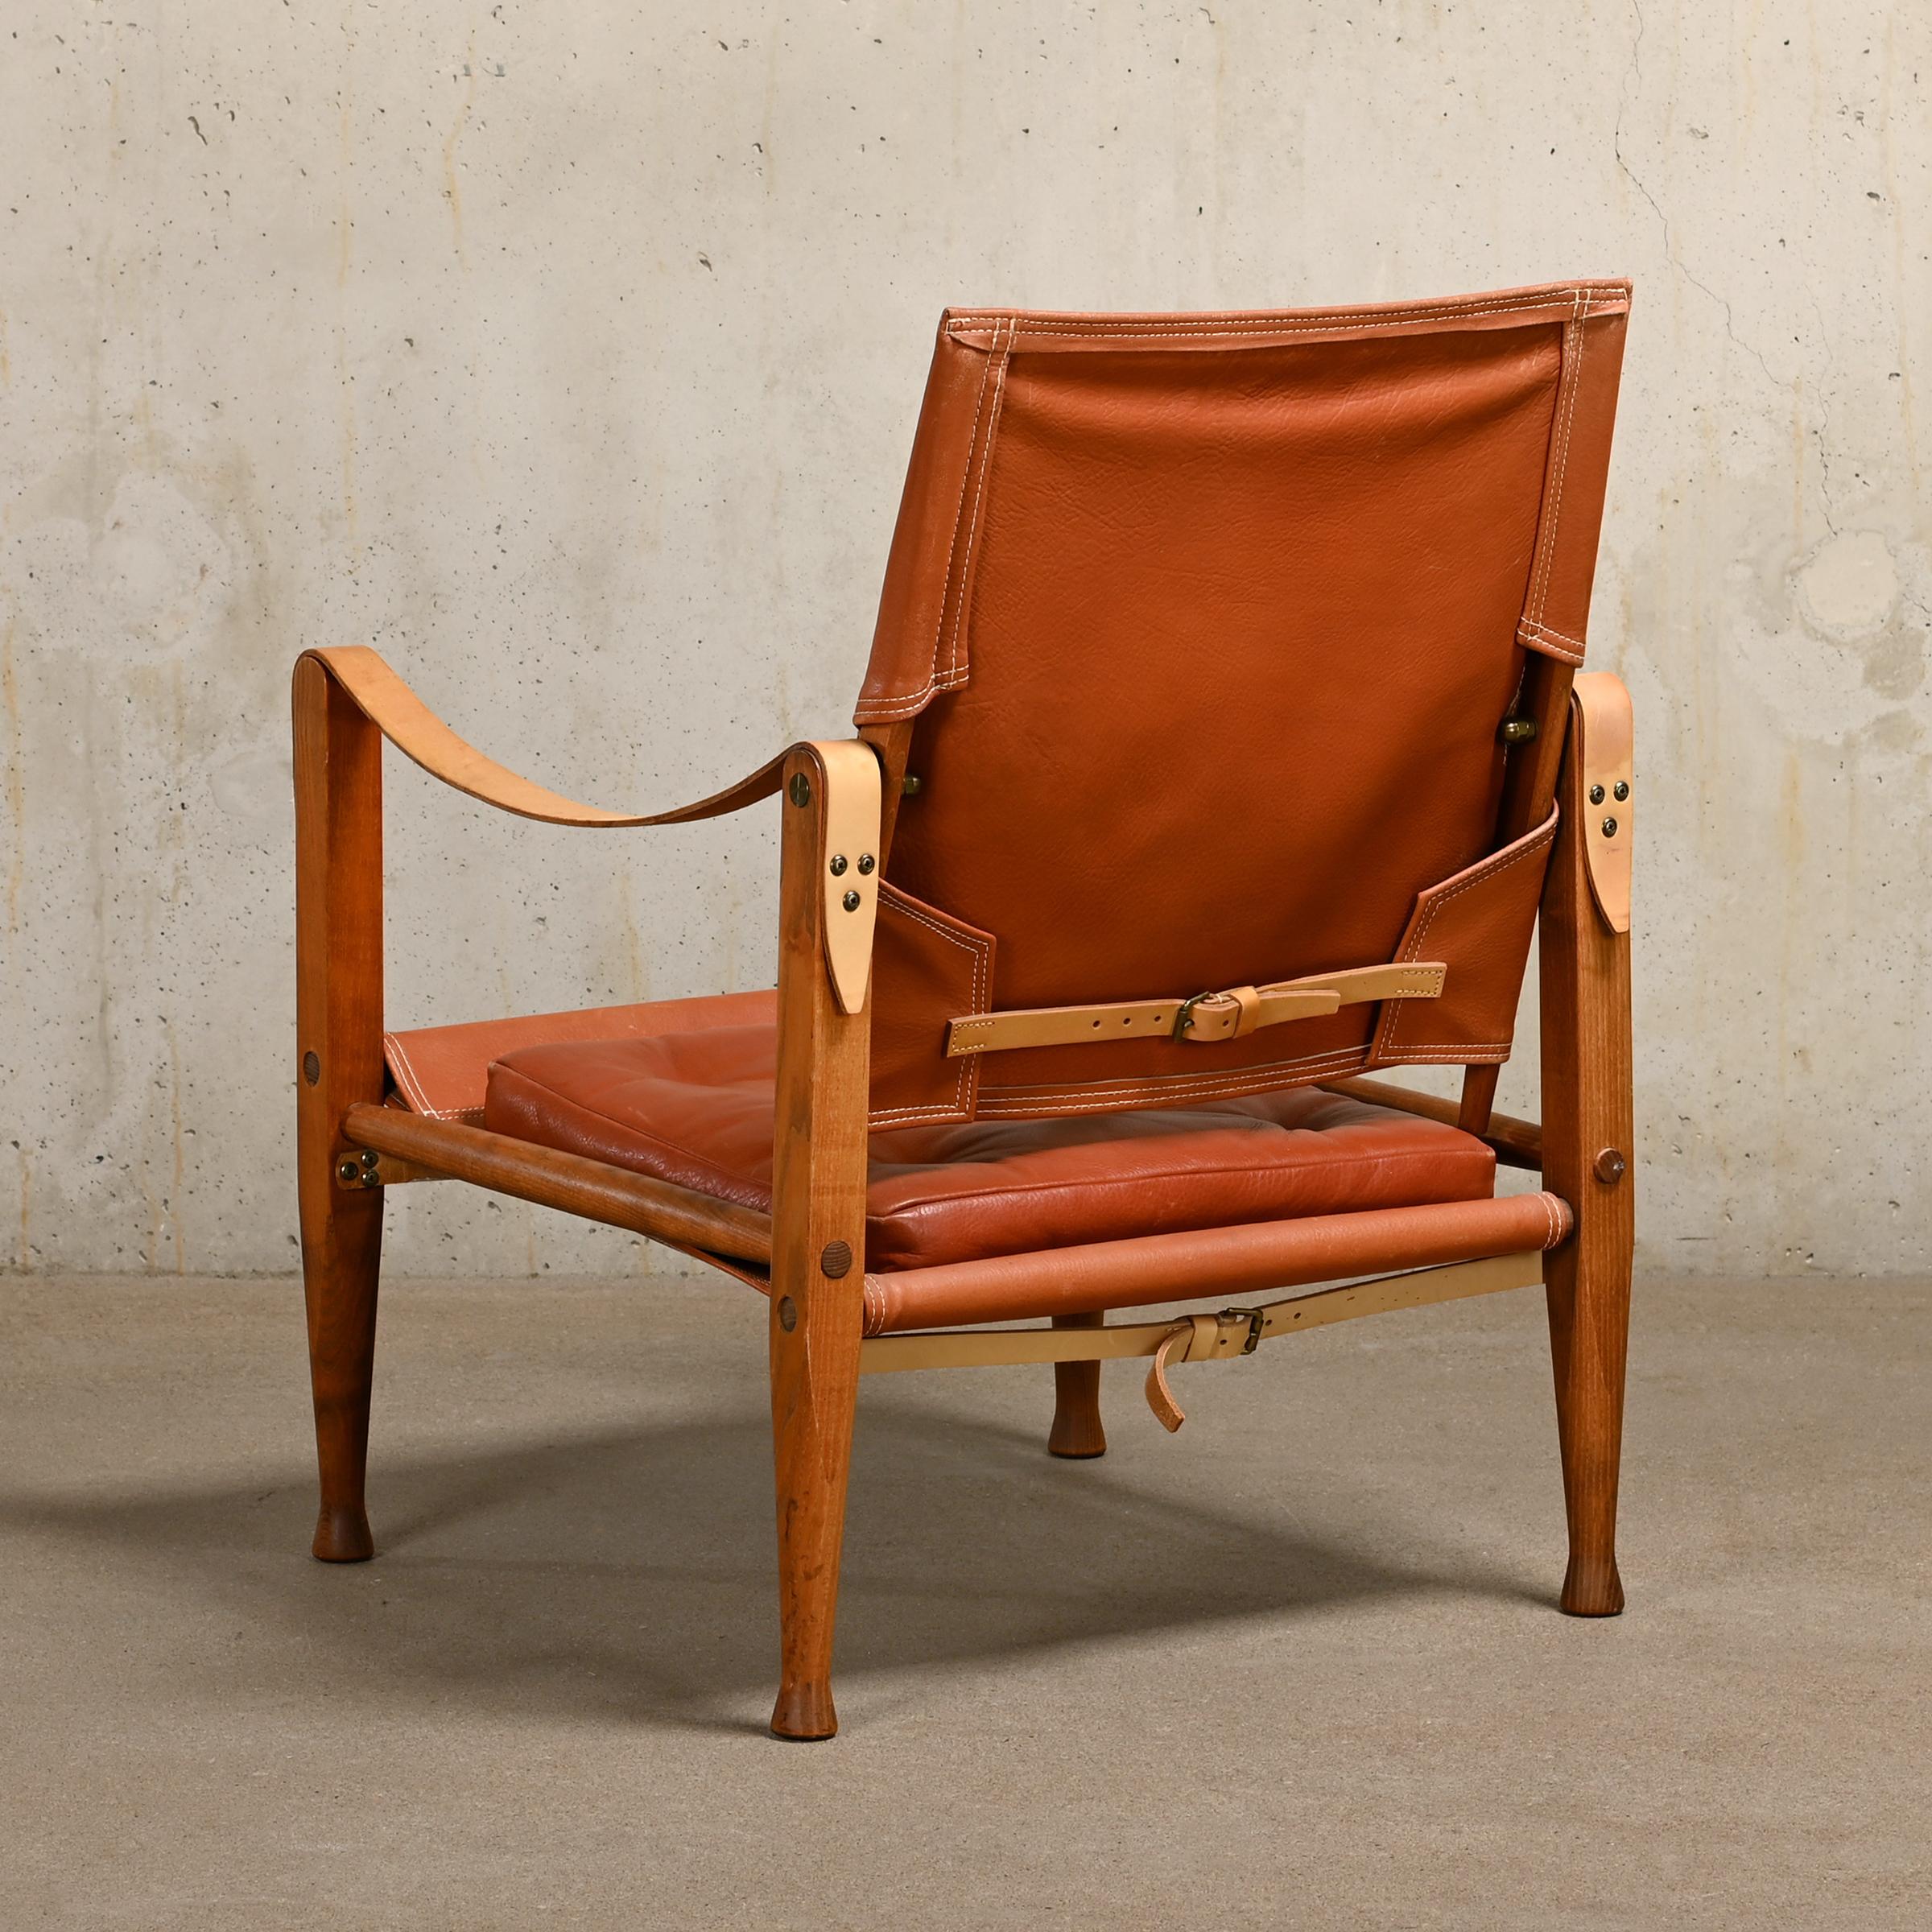 Iconic Safari armchair (model KK 47000) designed by Kaare Klint in 1933 and manufactured by Rud Rasmussen, Denmark. Ash wooden frame upholstered with brown leather seat, back and losse cushion. Armrests and straps with full grain leather. The chair